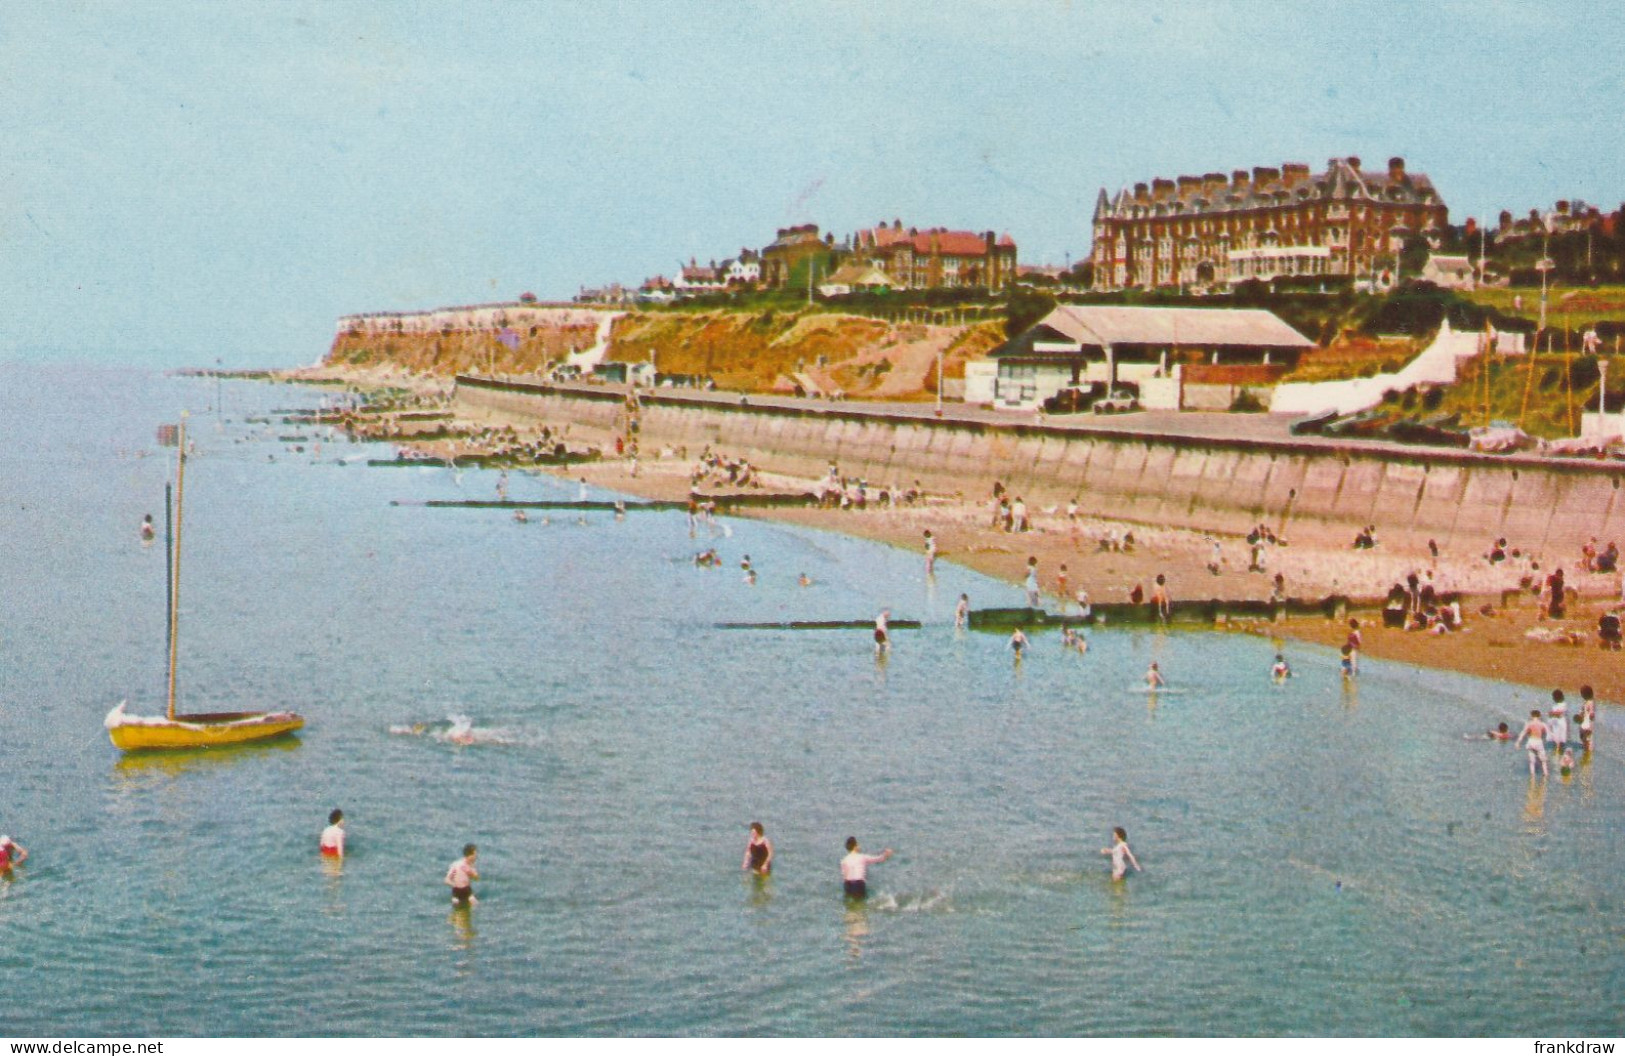 Postcard - North Promenade And Cliffs From Pier, Hunstanton - Dated In Pencil Aug 8th 1966  - Very Good - Non Classés